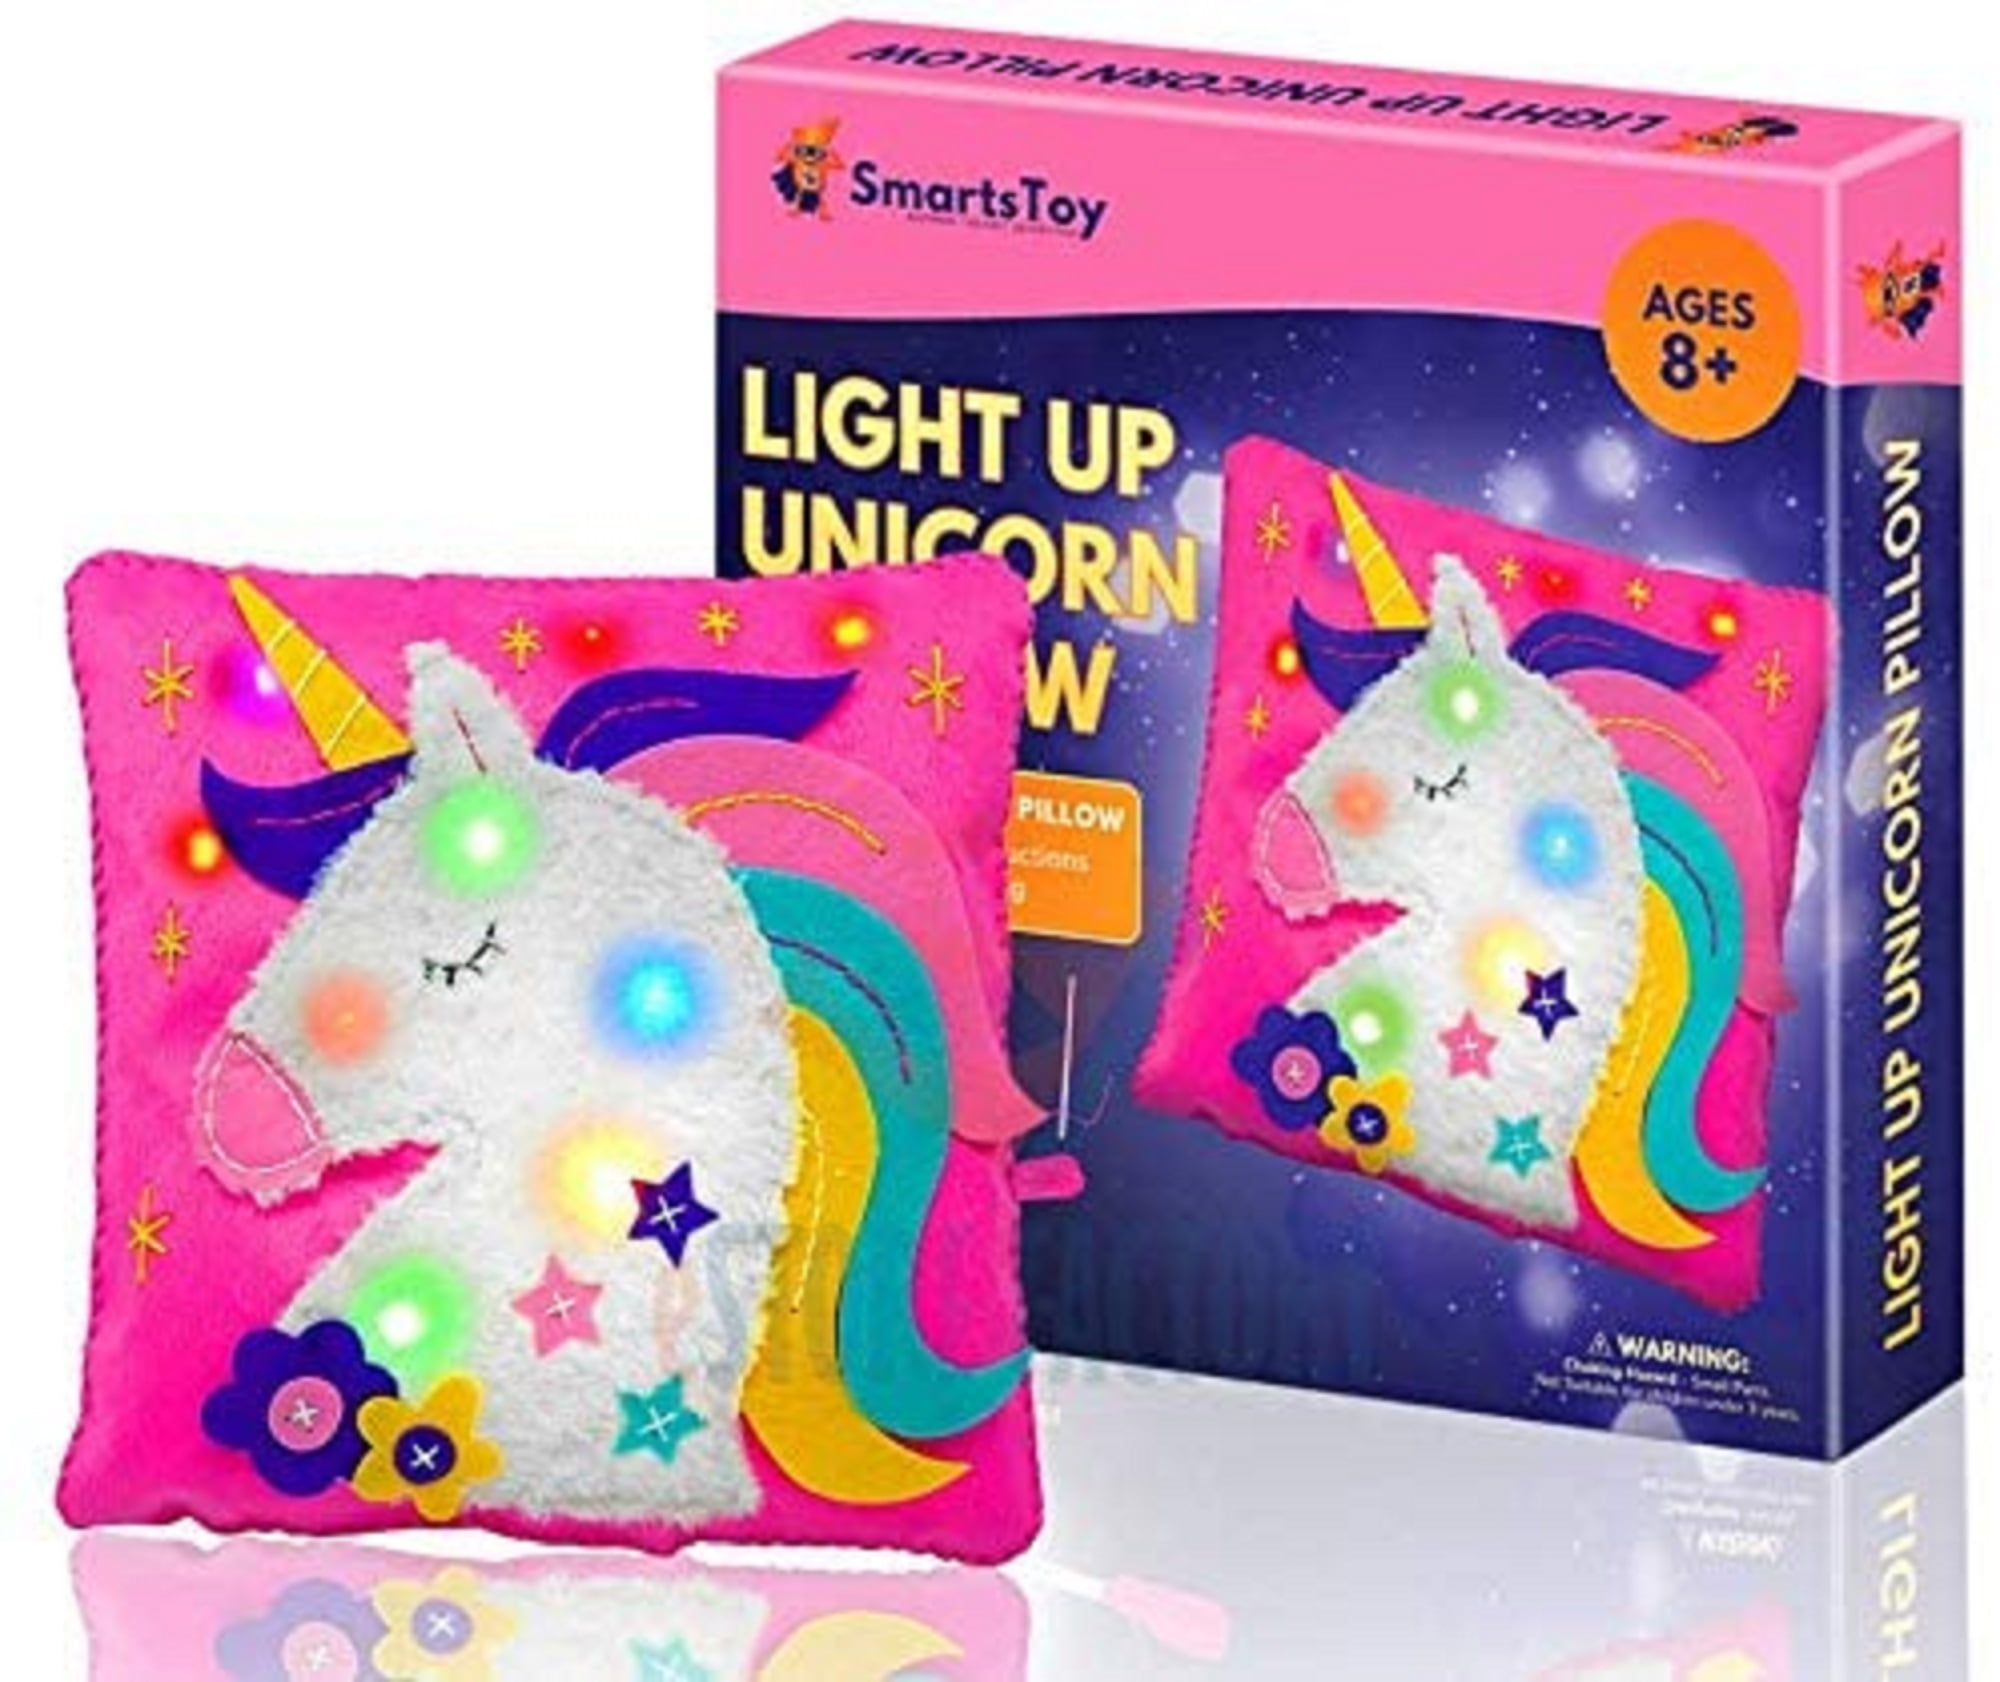 Unicorn Pillows Crafts for Kids Sewing Kit with Lights, Unicorn Arts and Crafts